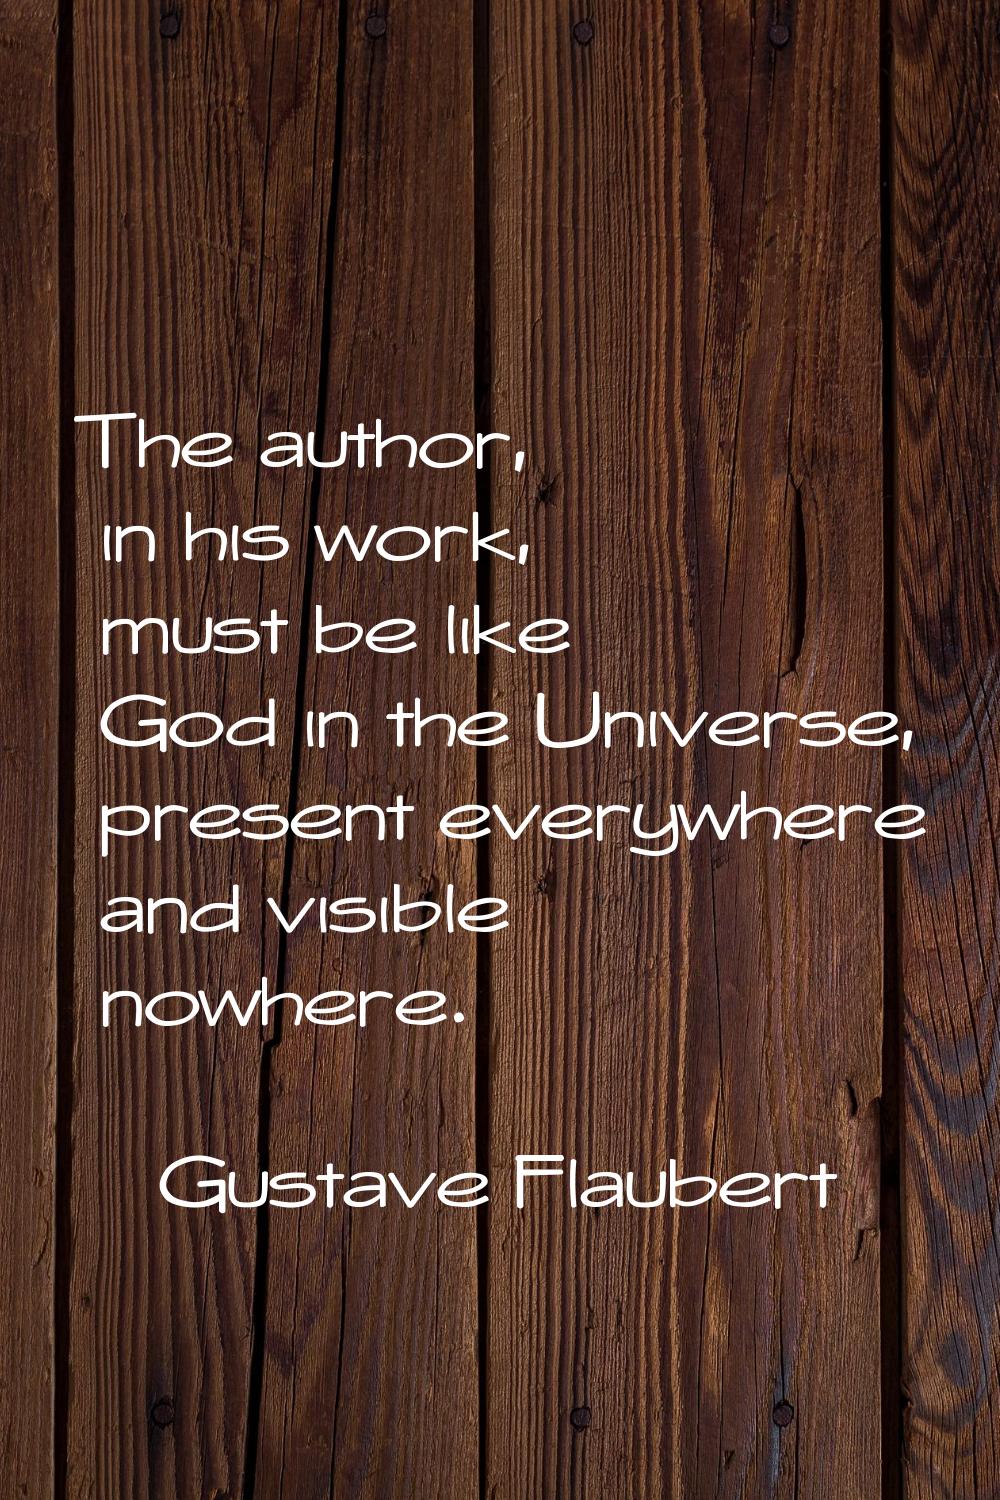 The author, in his work, must be like God in the Universe, present everywhere and visible nowhere.